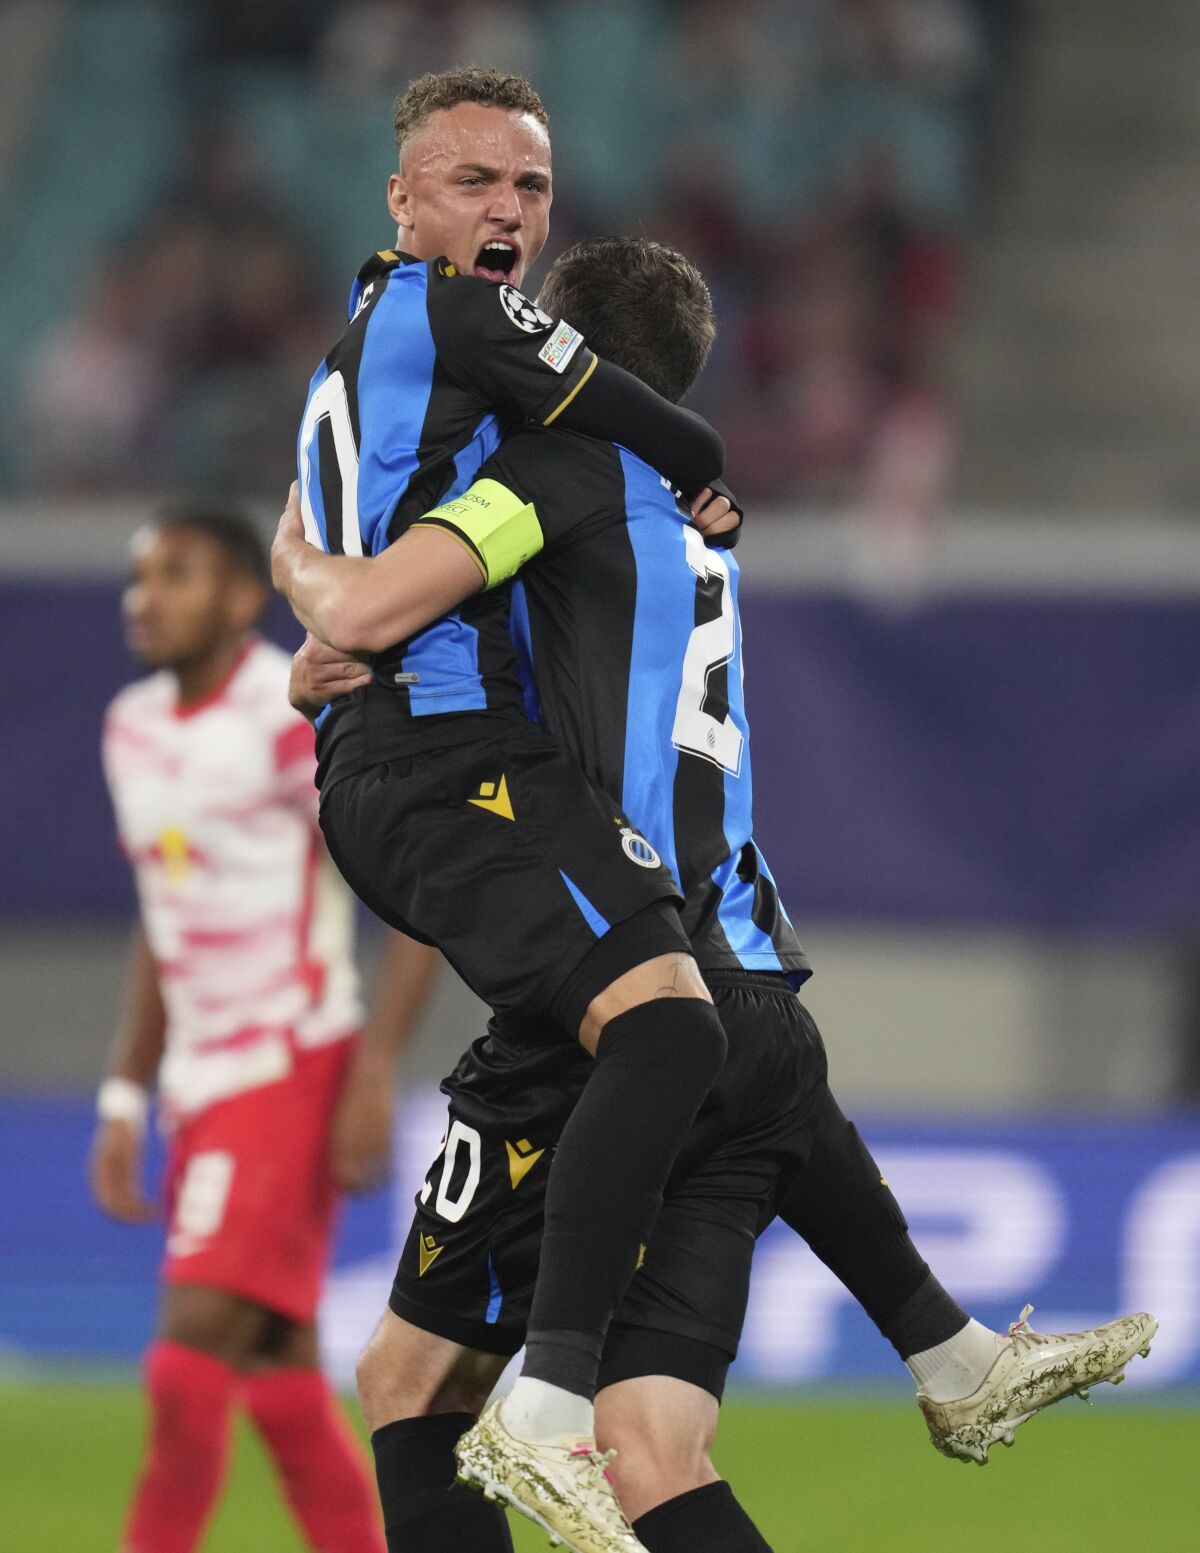 Brugge's Hans Vanaken, right, celebrates with Brugge's Noa Lang after scoring his sides first goal during the Group A Champion's League soccer match between RB Leipzig and Club Brugge at the Red Bull Arena in Leipzig, Germany, Tuesday, Sept. 28, 2021. (AP Photo/Michael Sohn)